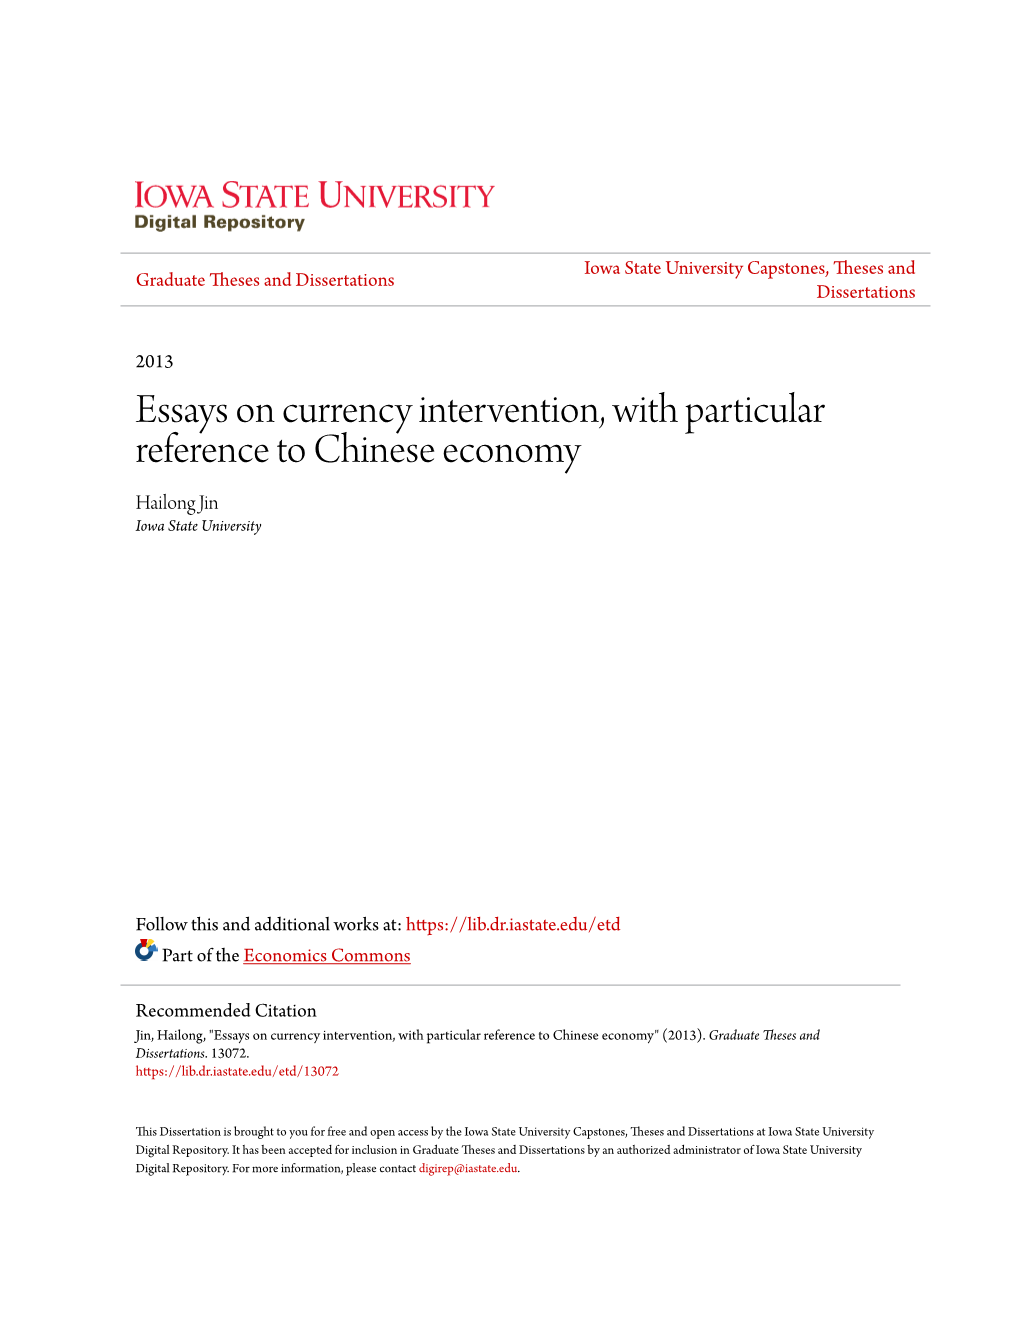 Essays on Currency Intervention, with Particular Reference to Chinese Economy Hailong Jin Iowa State University